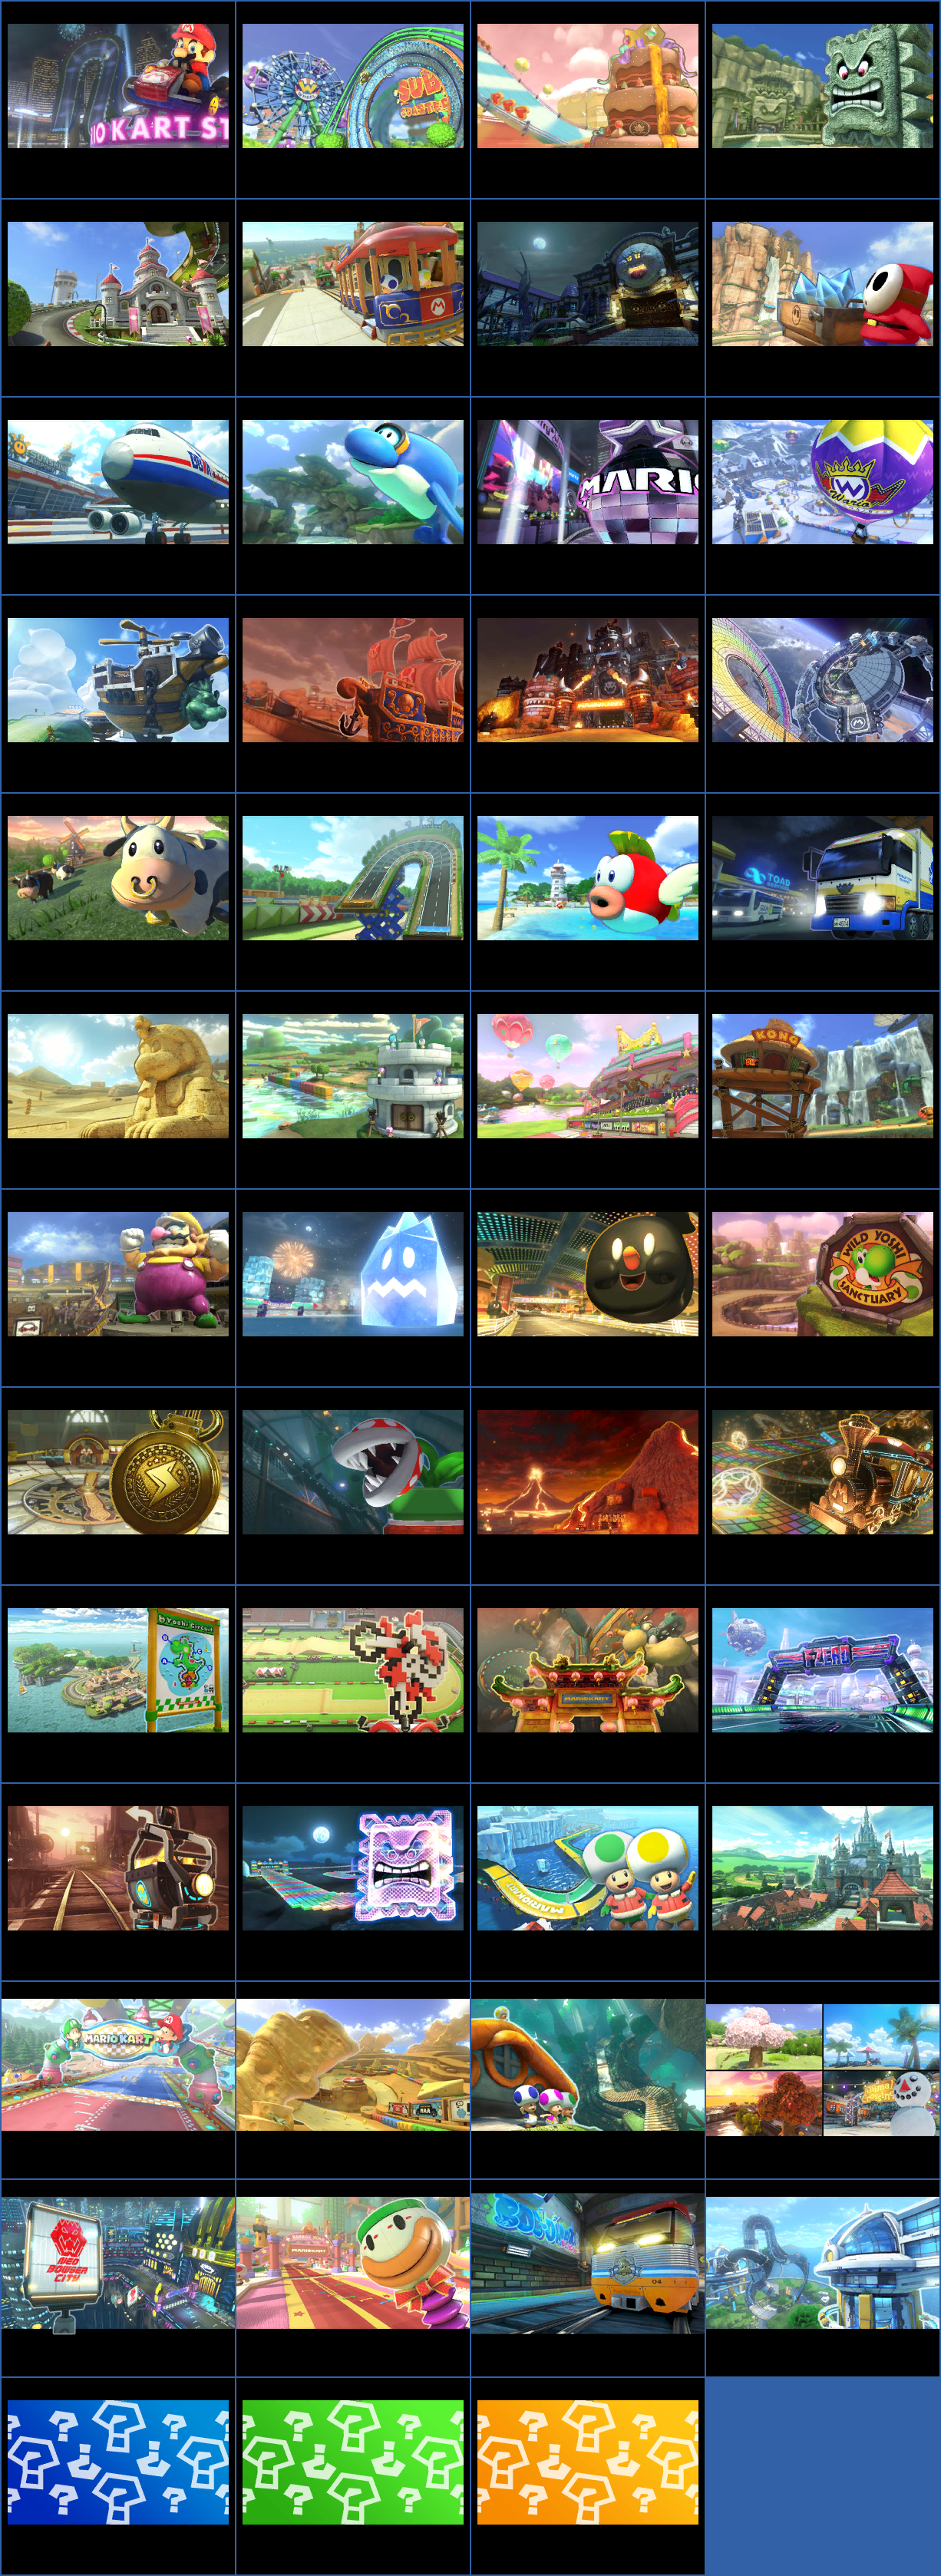 Wii U Mario Kart 8 Course Previews The Spriters Resource 5688